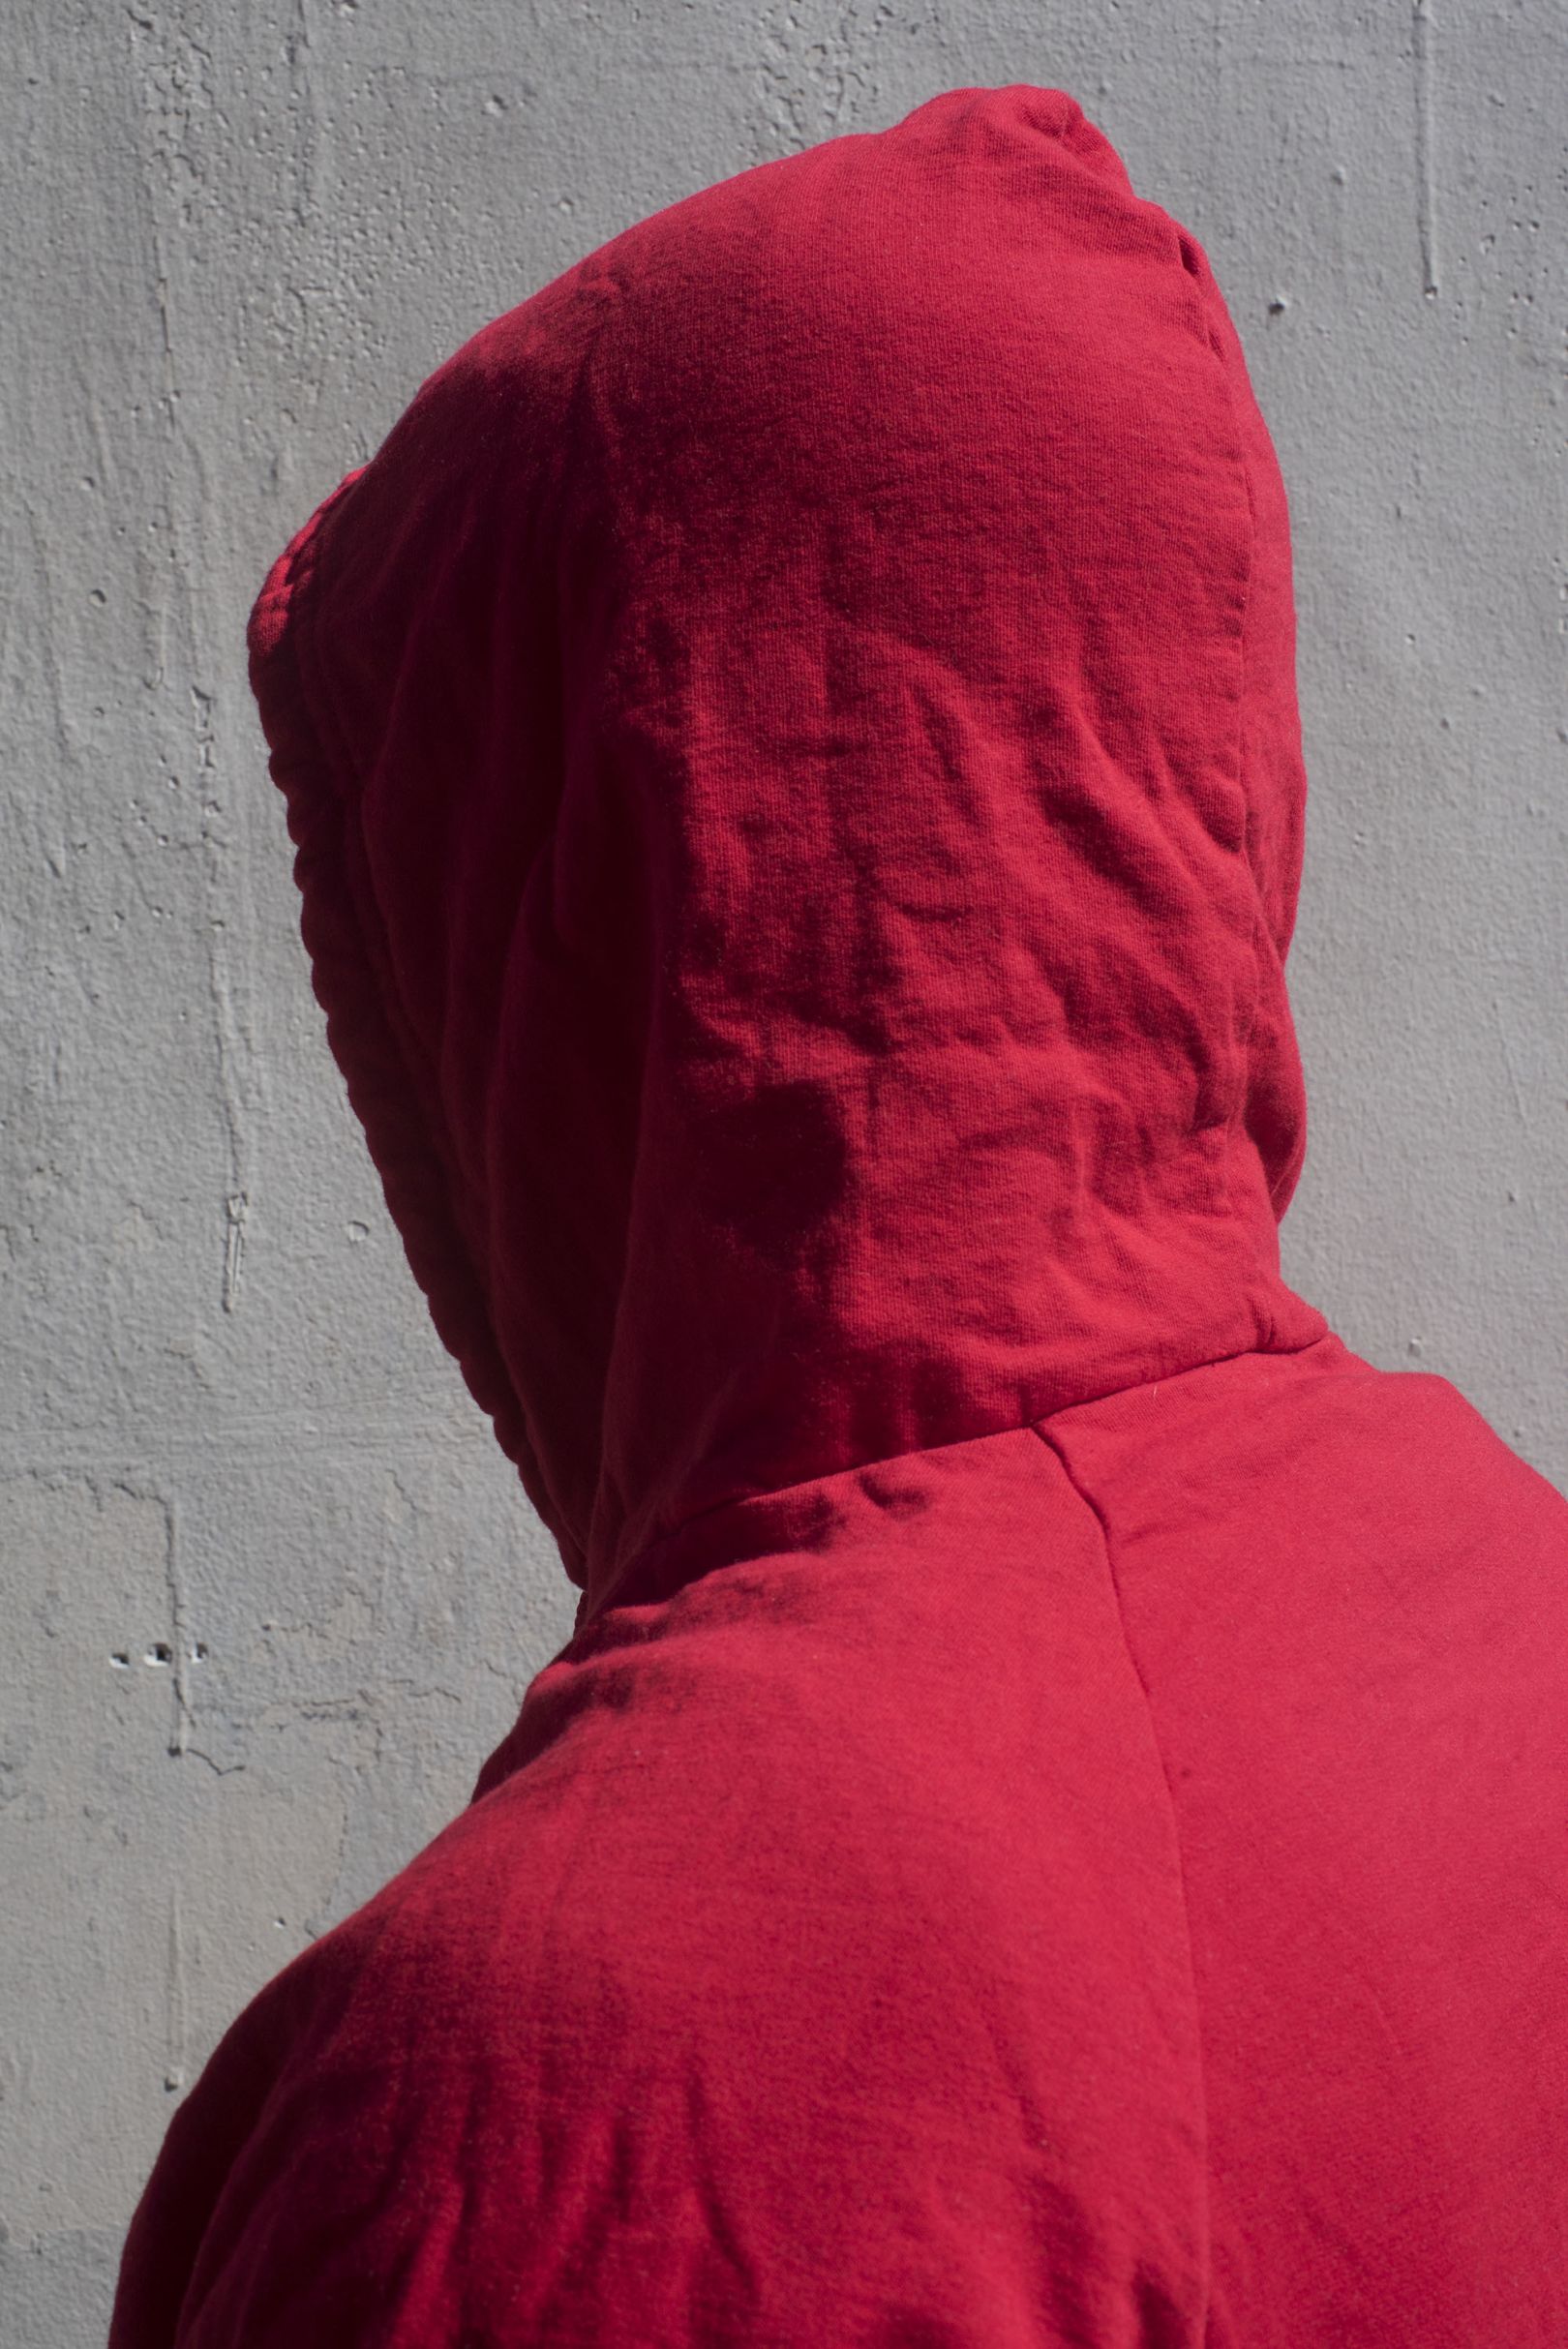 The Hoodie is a new exhibition that explores the many roles and stories ...